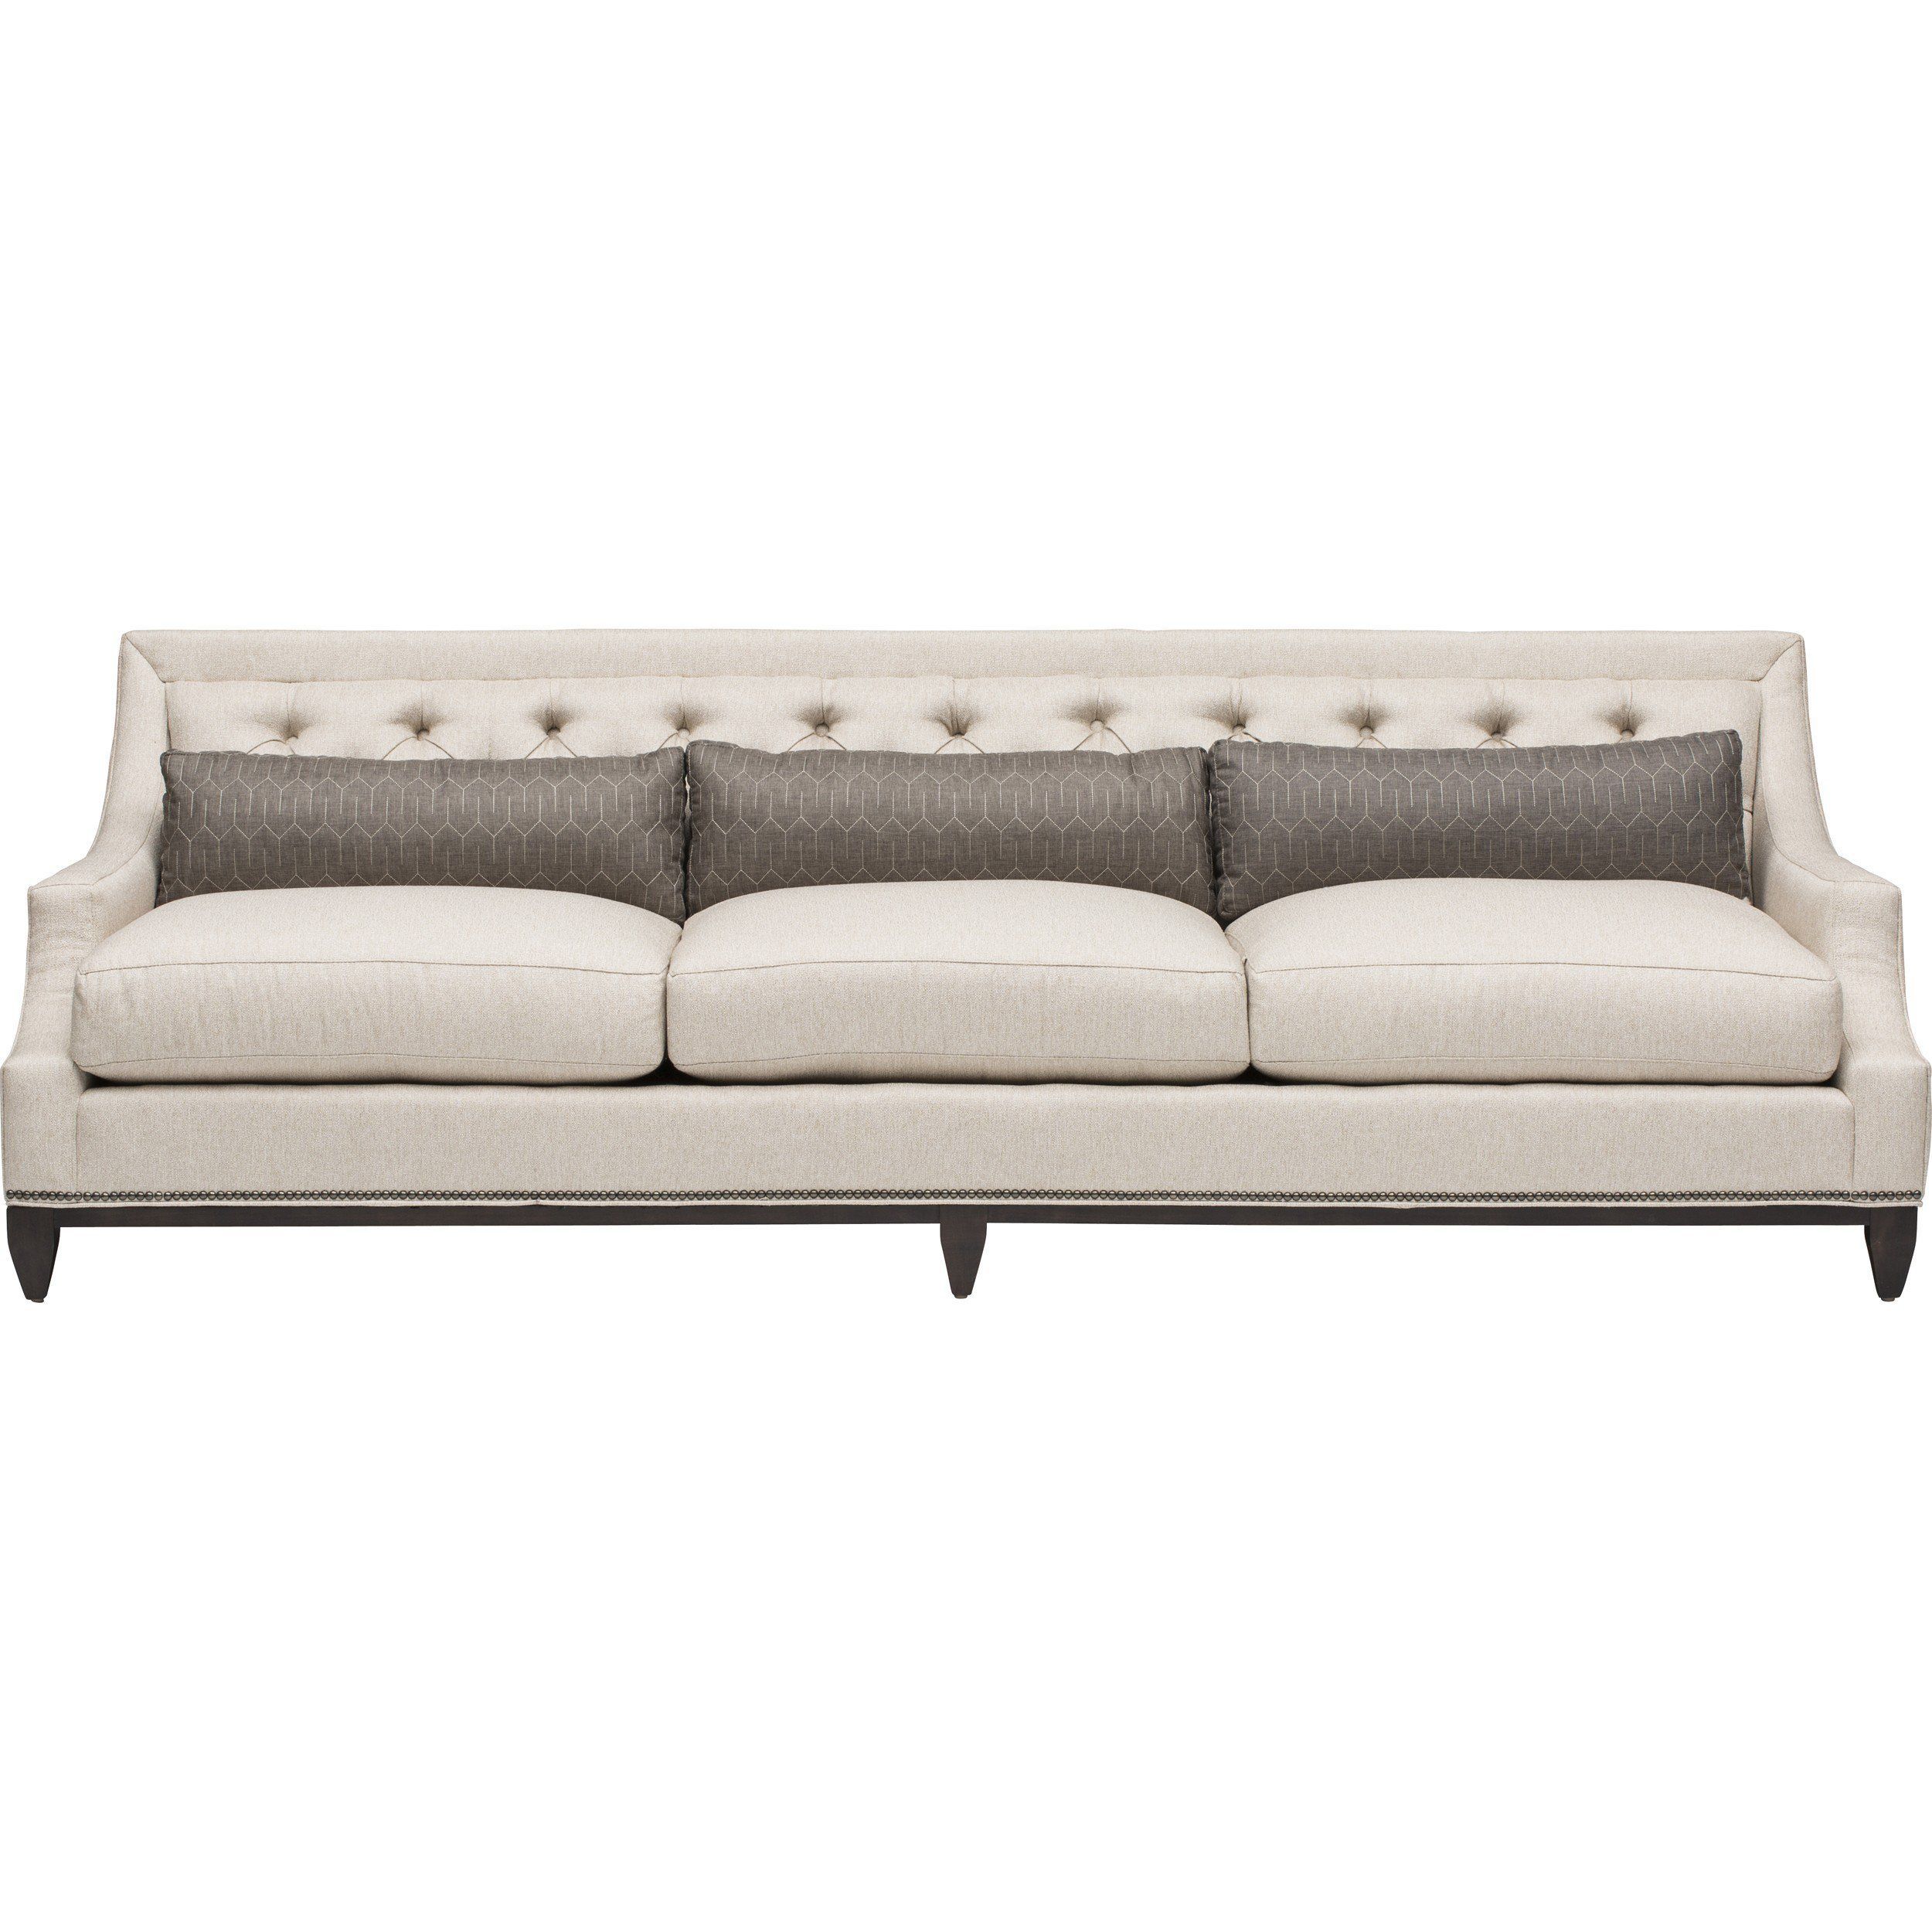 Stratford Sofa, Tradewinds Pearl | Pallet Furniture Sofa In Stratford Sofas (View 13 of 15)